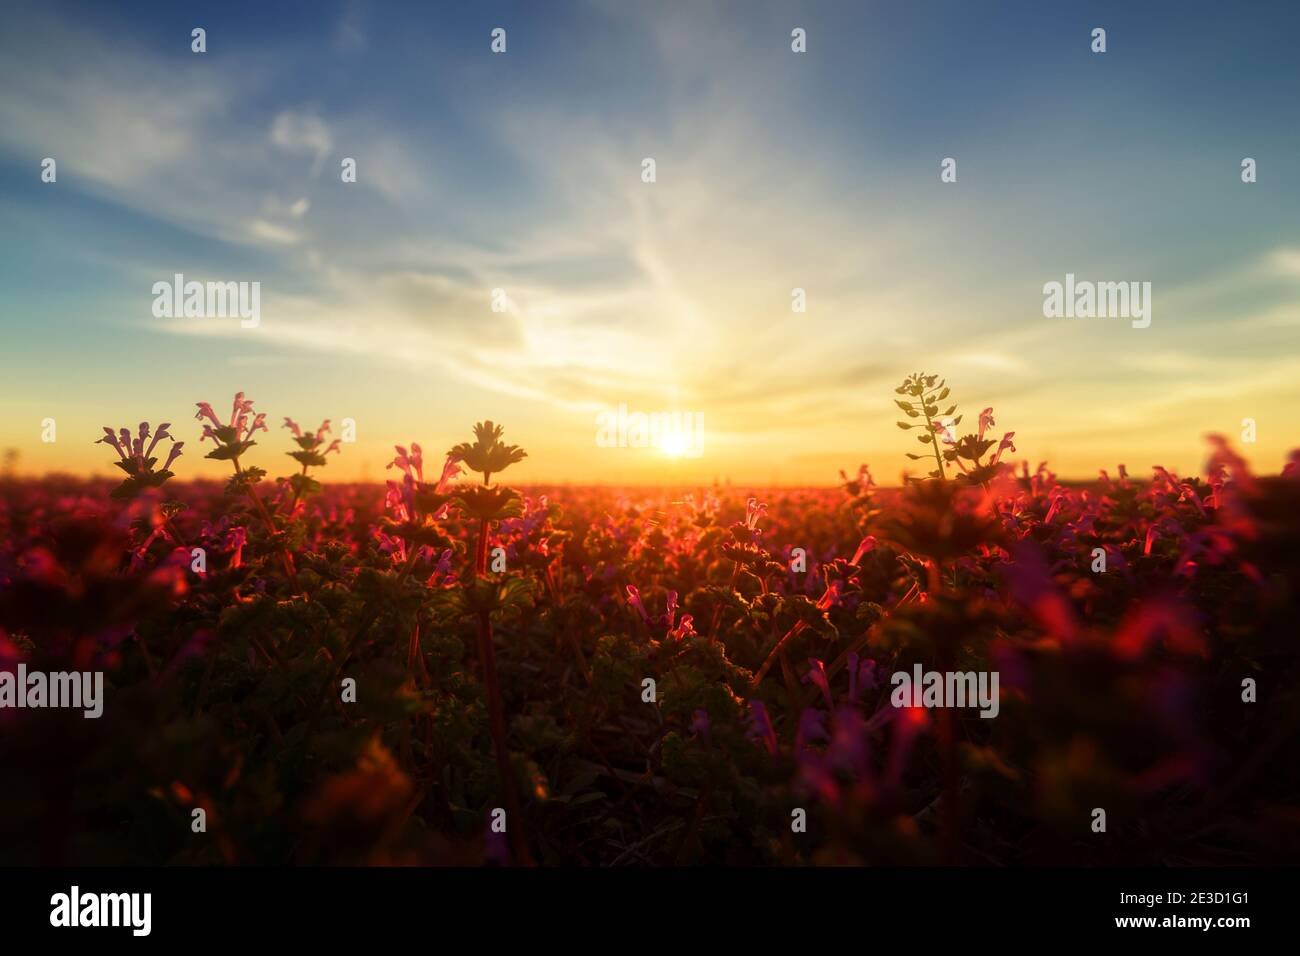 A field of henbit and purple deadnettle make for a compelling foreground to a vibrant sunset sky.  Clouds on the horizon draw the eye into the sun. Stock Photo